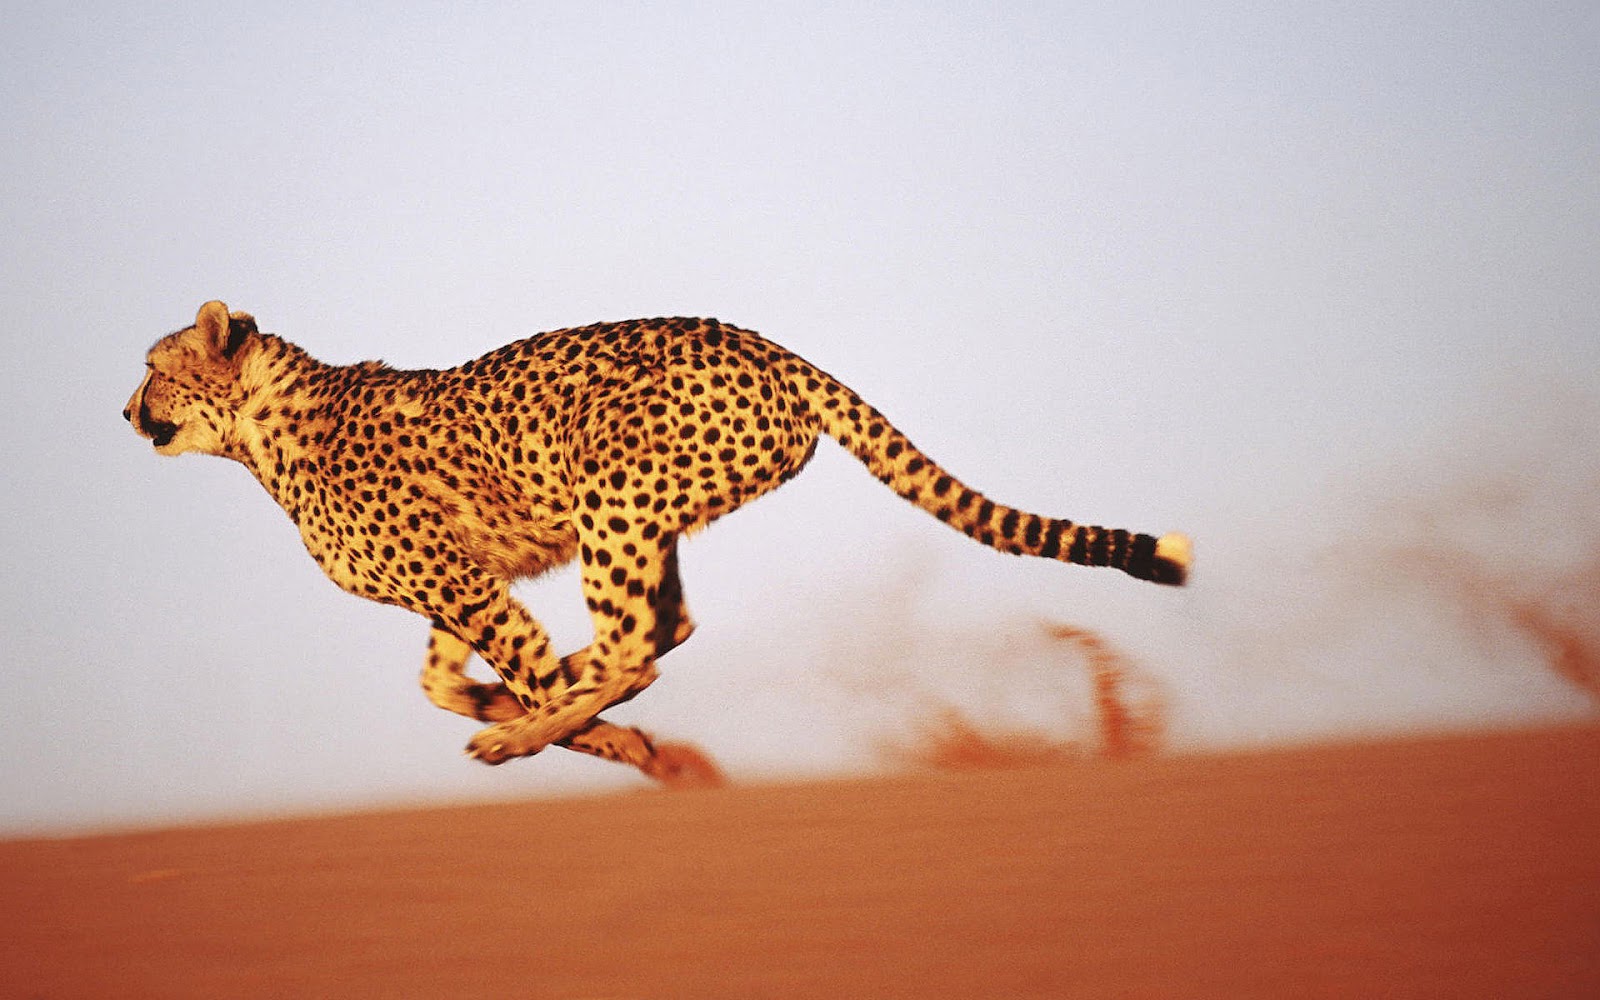 HD Cheetah Wallpaper With A Fast Running In The Desert